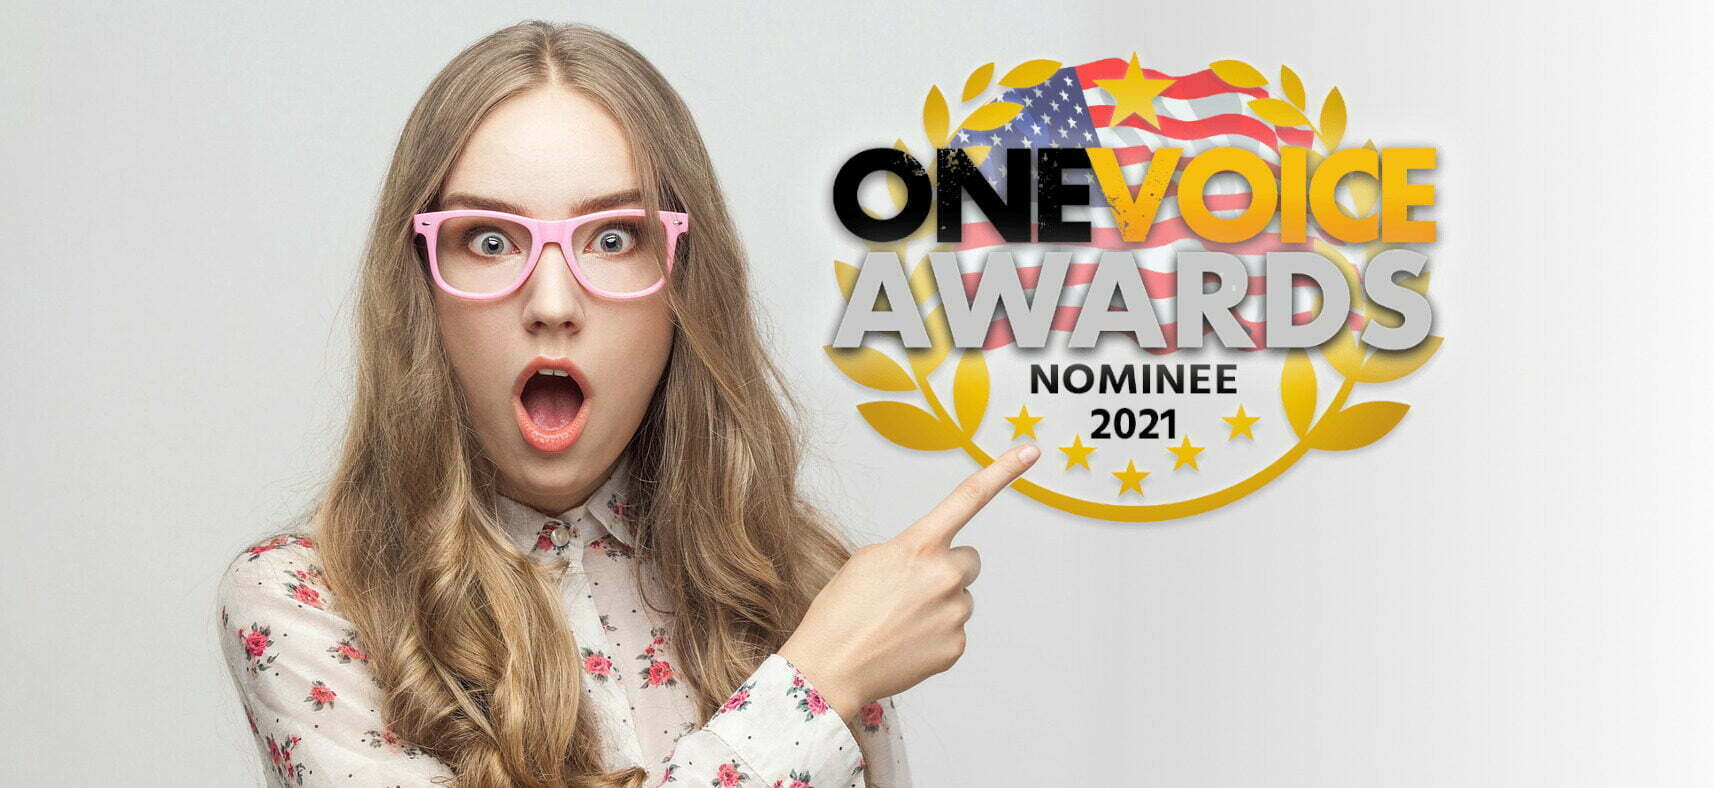 Surprised by OneVoice Award Nomination